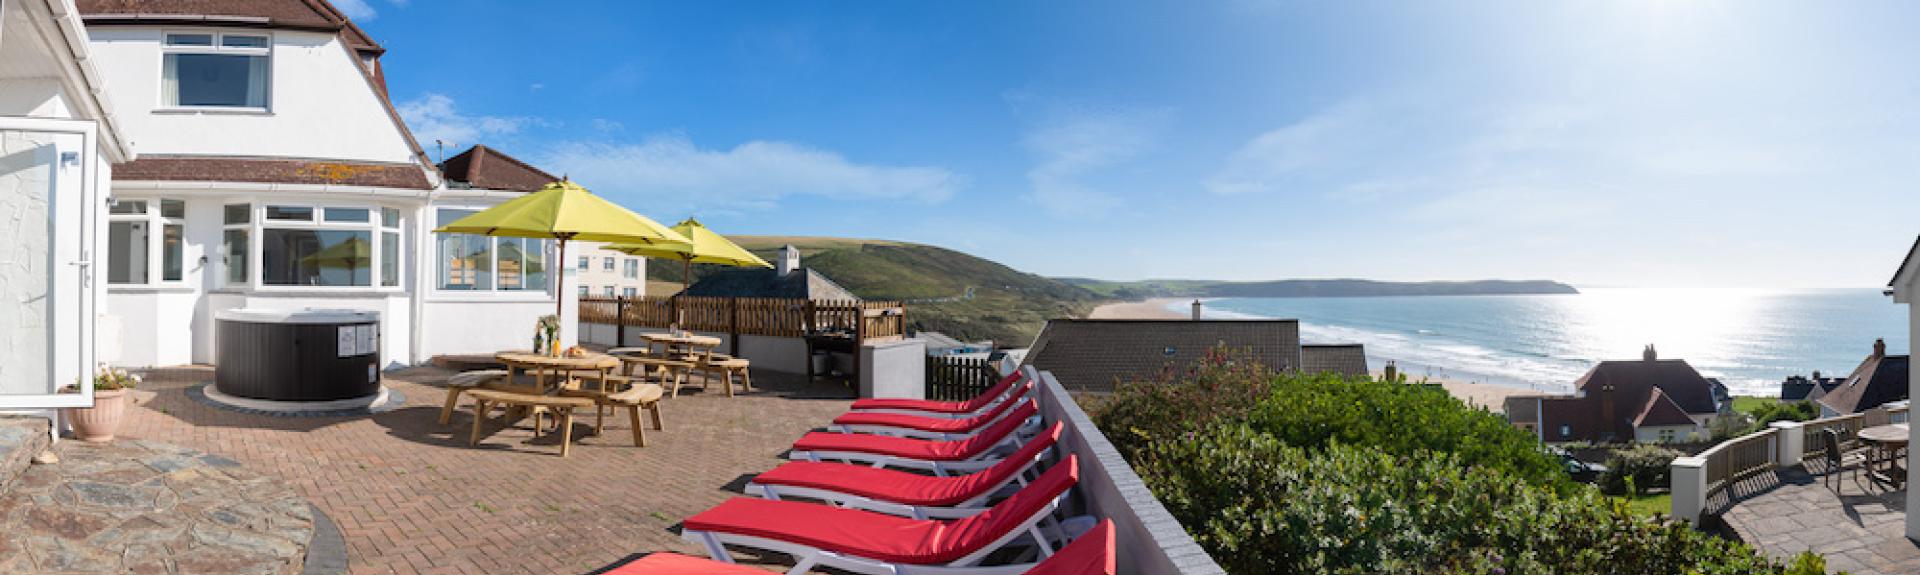 A 2-storey holiday cottage with a large sun terrace overlooks a sandy beach.